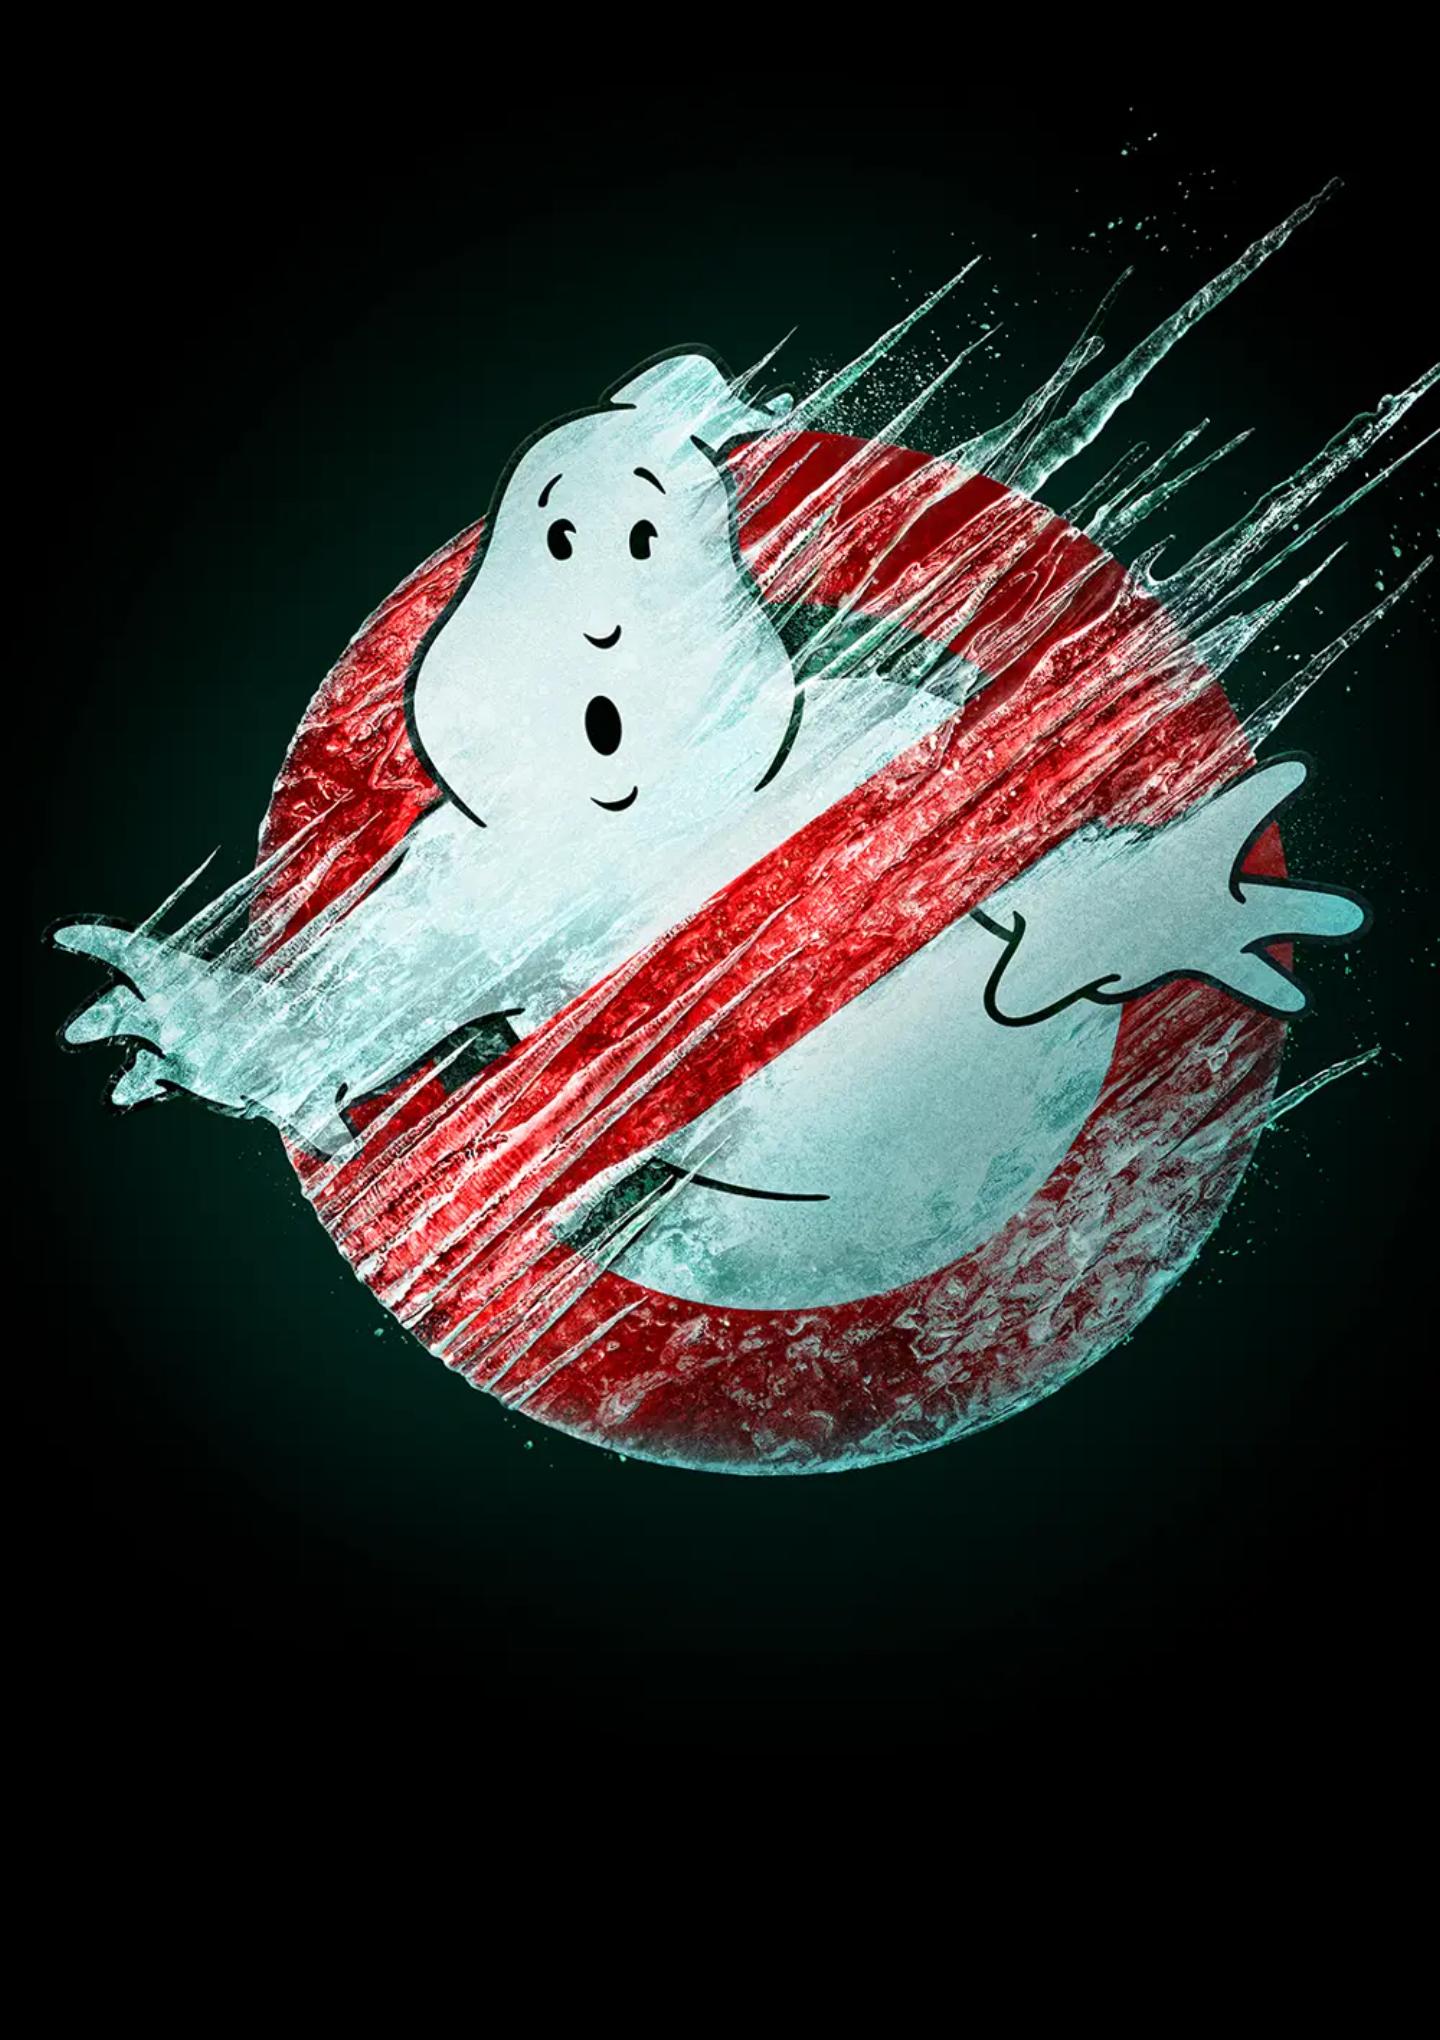 Plakat for 'Ghostbusters Sequel'